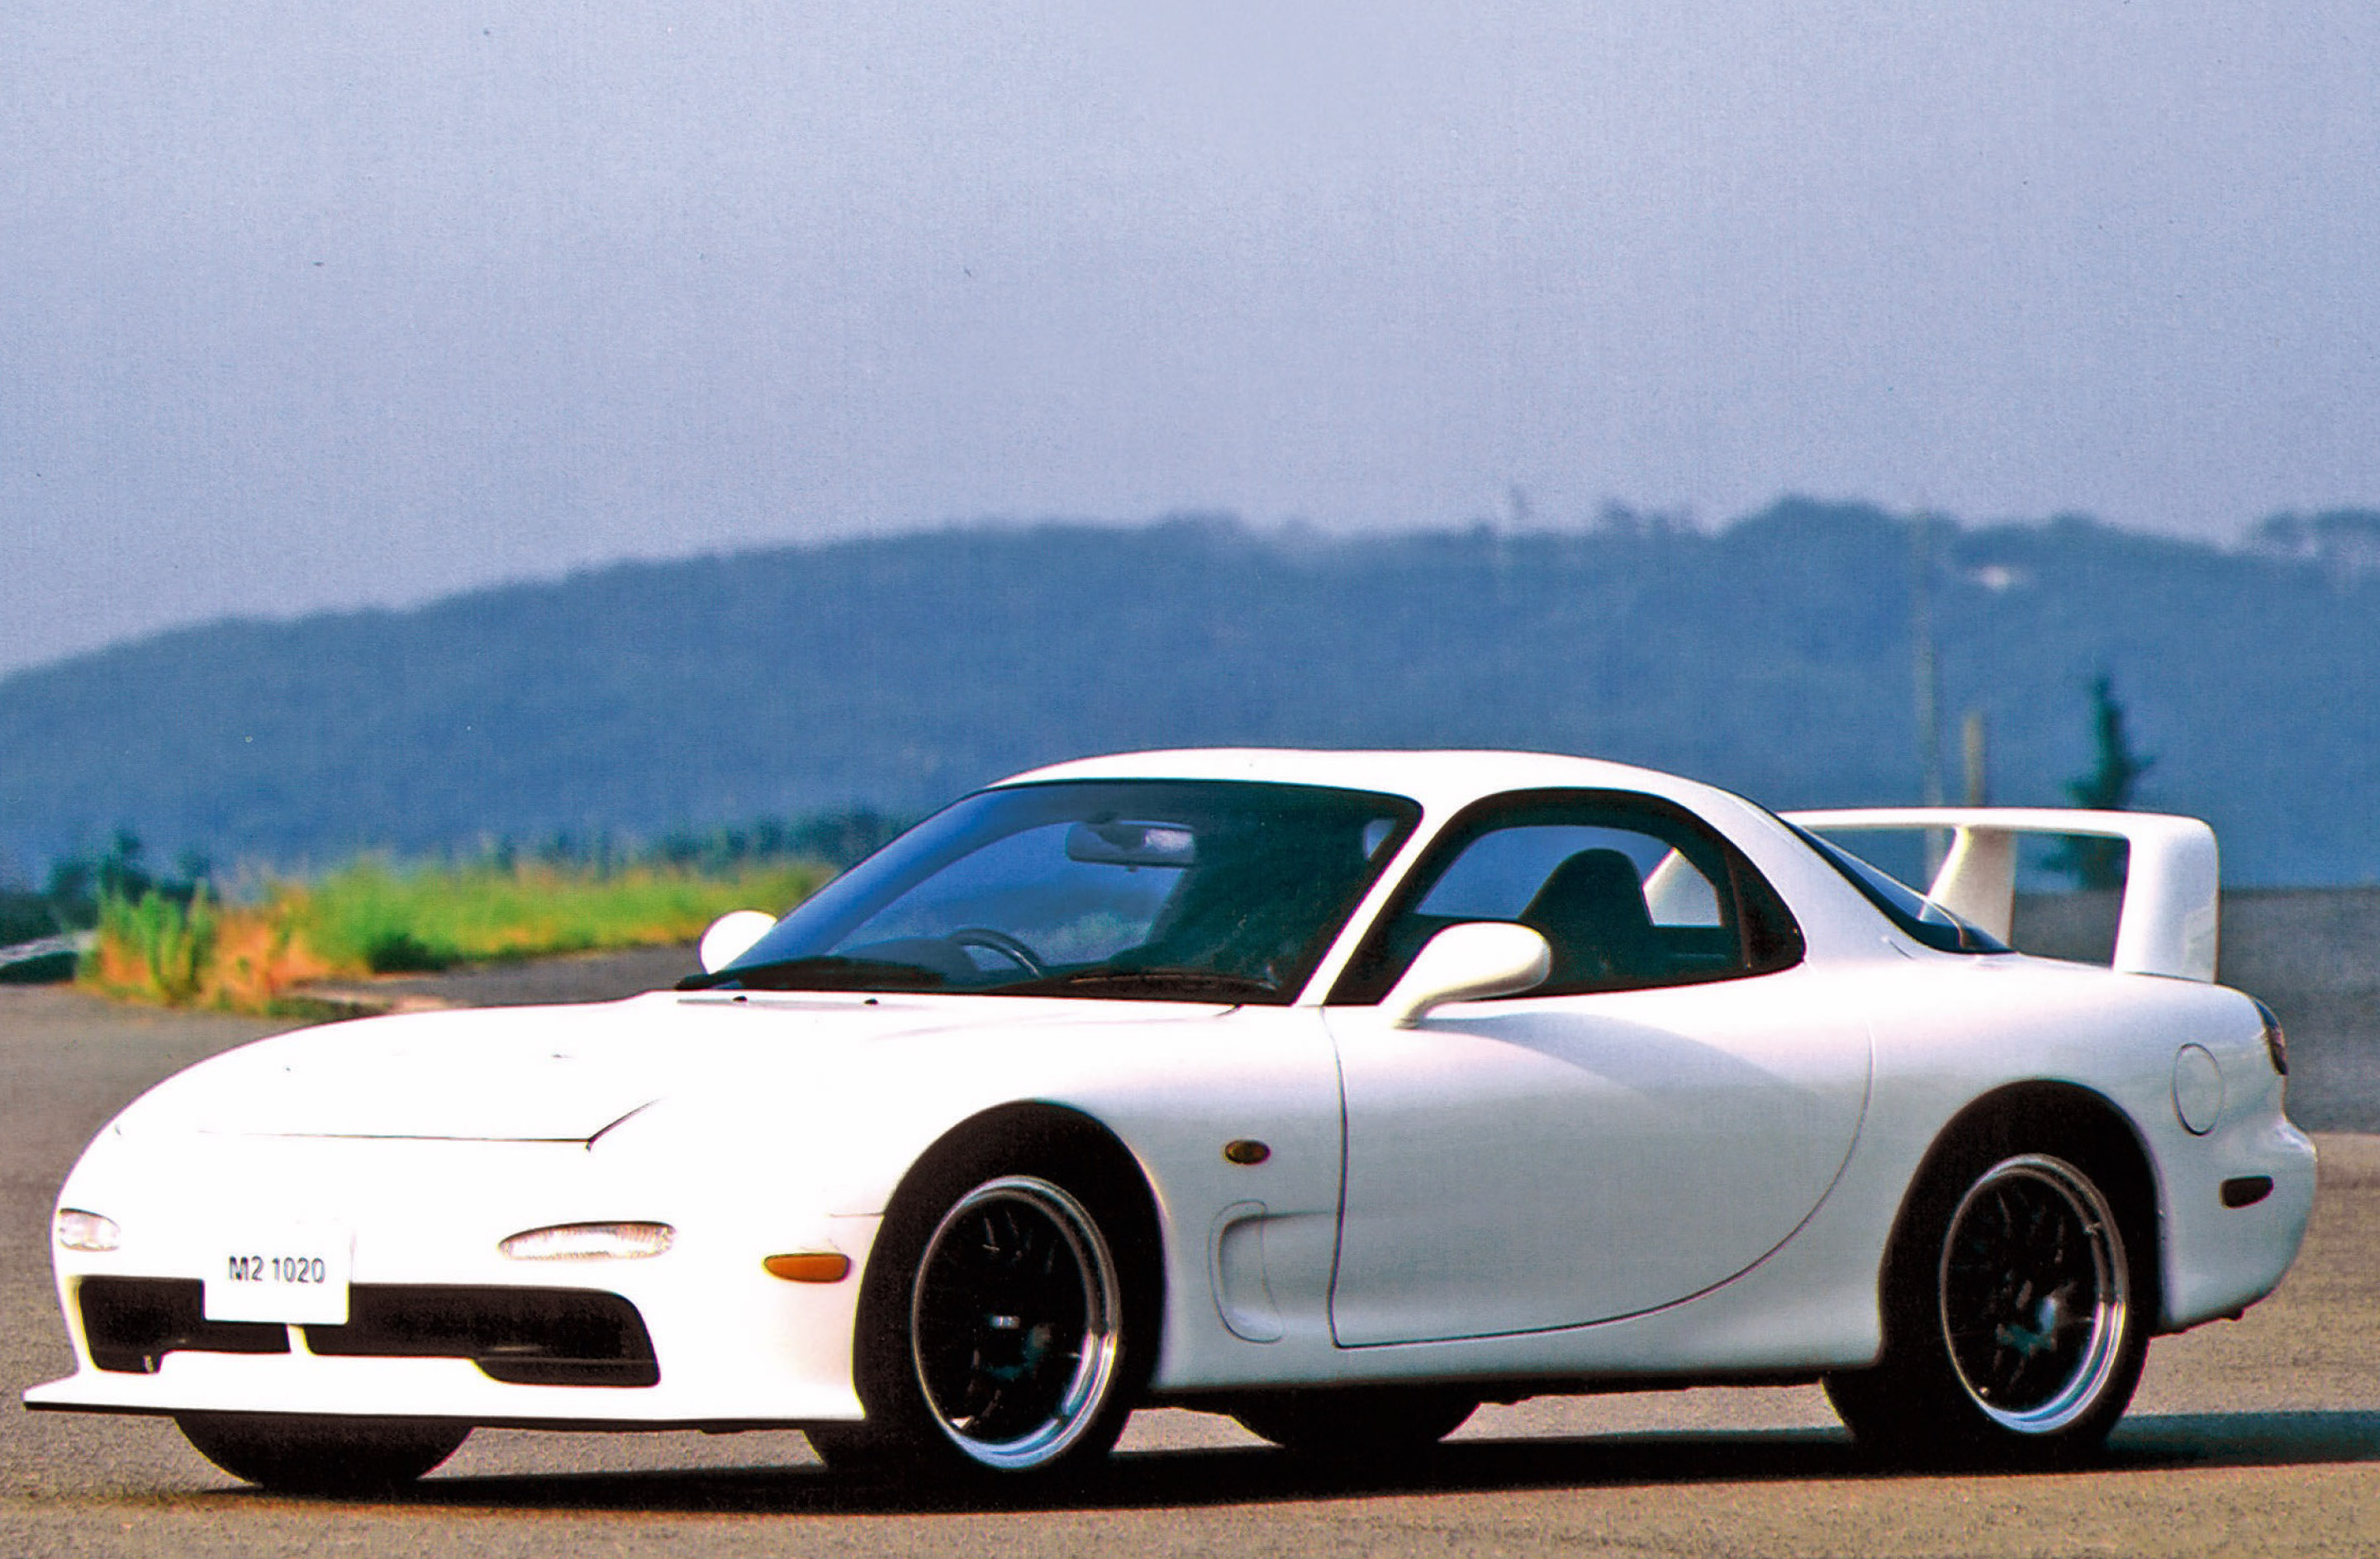 The RX-7 now has a strong cult following